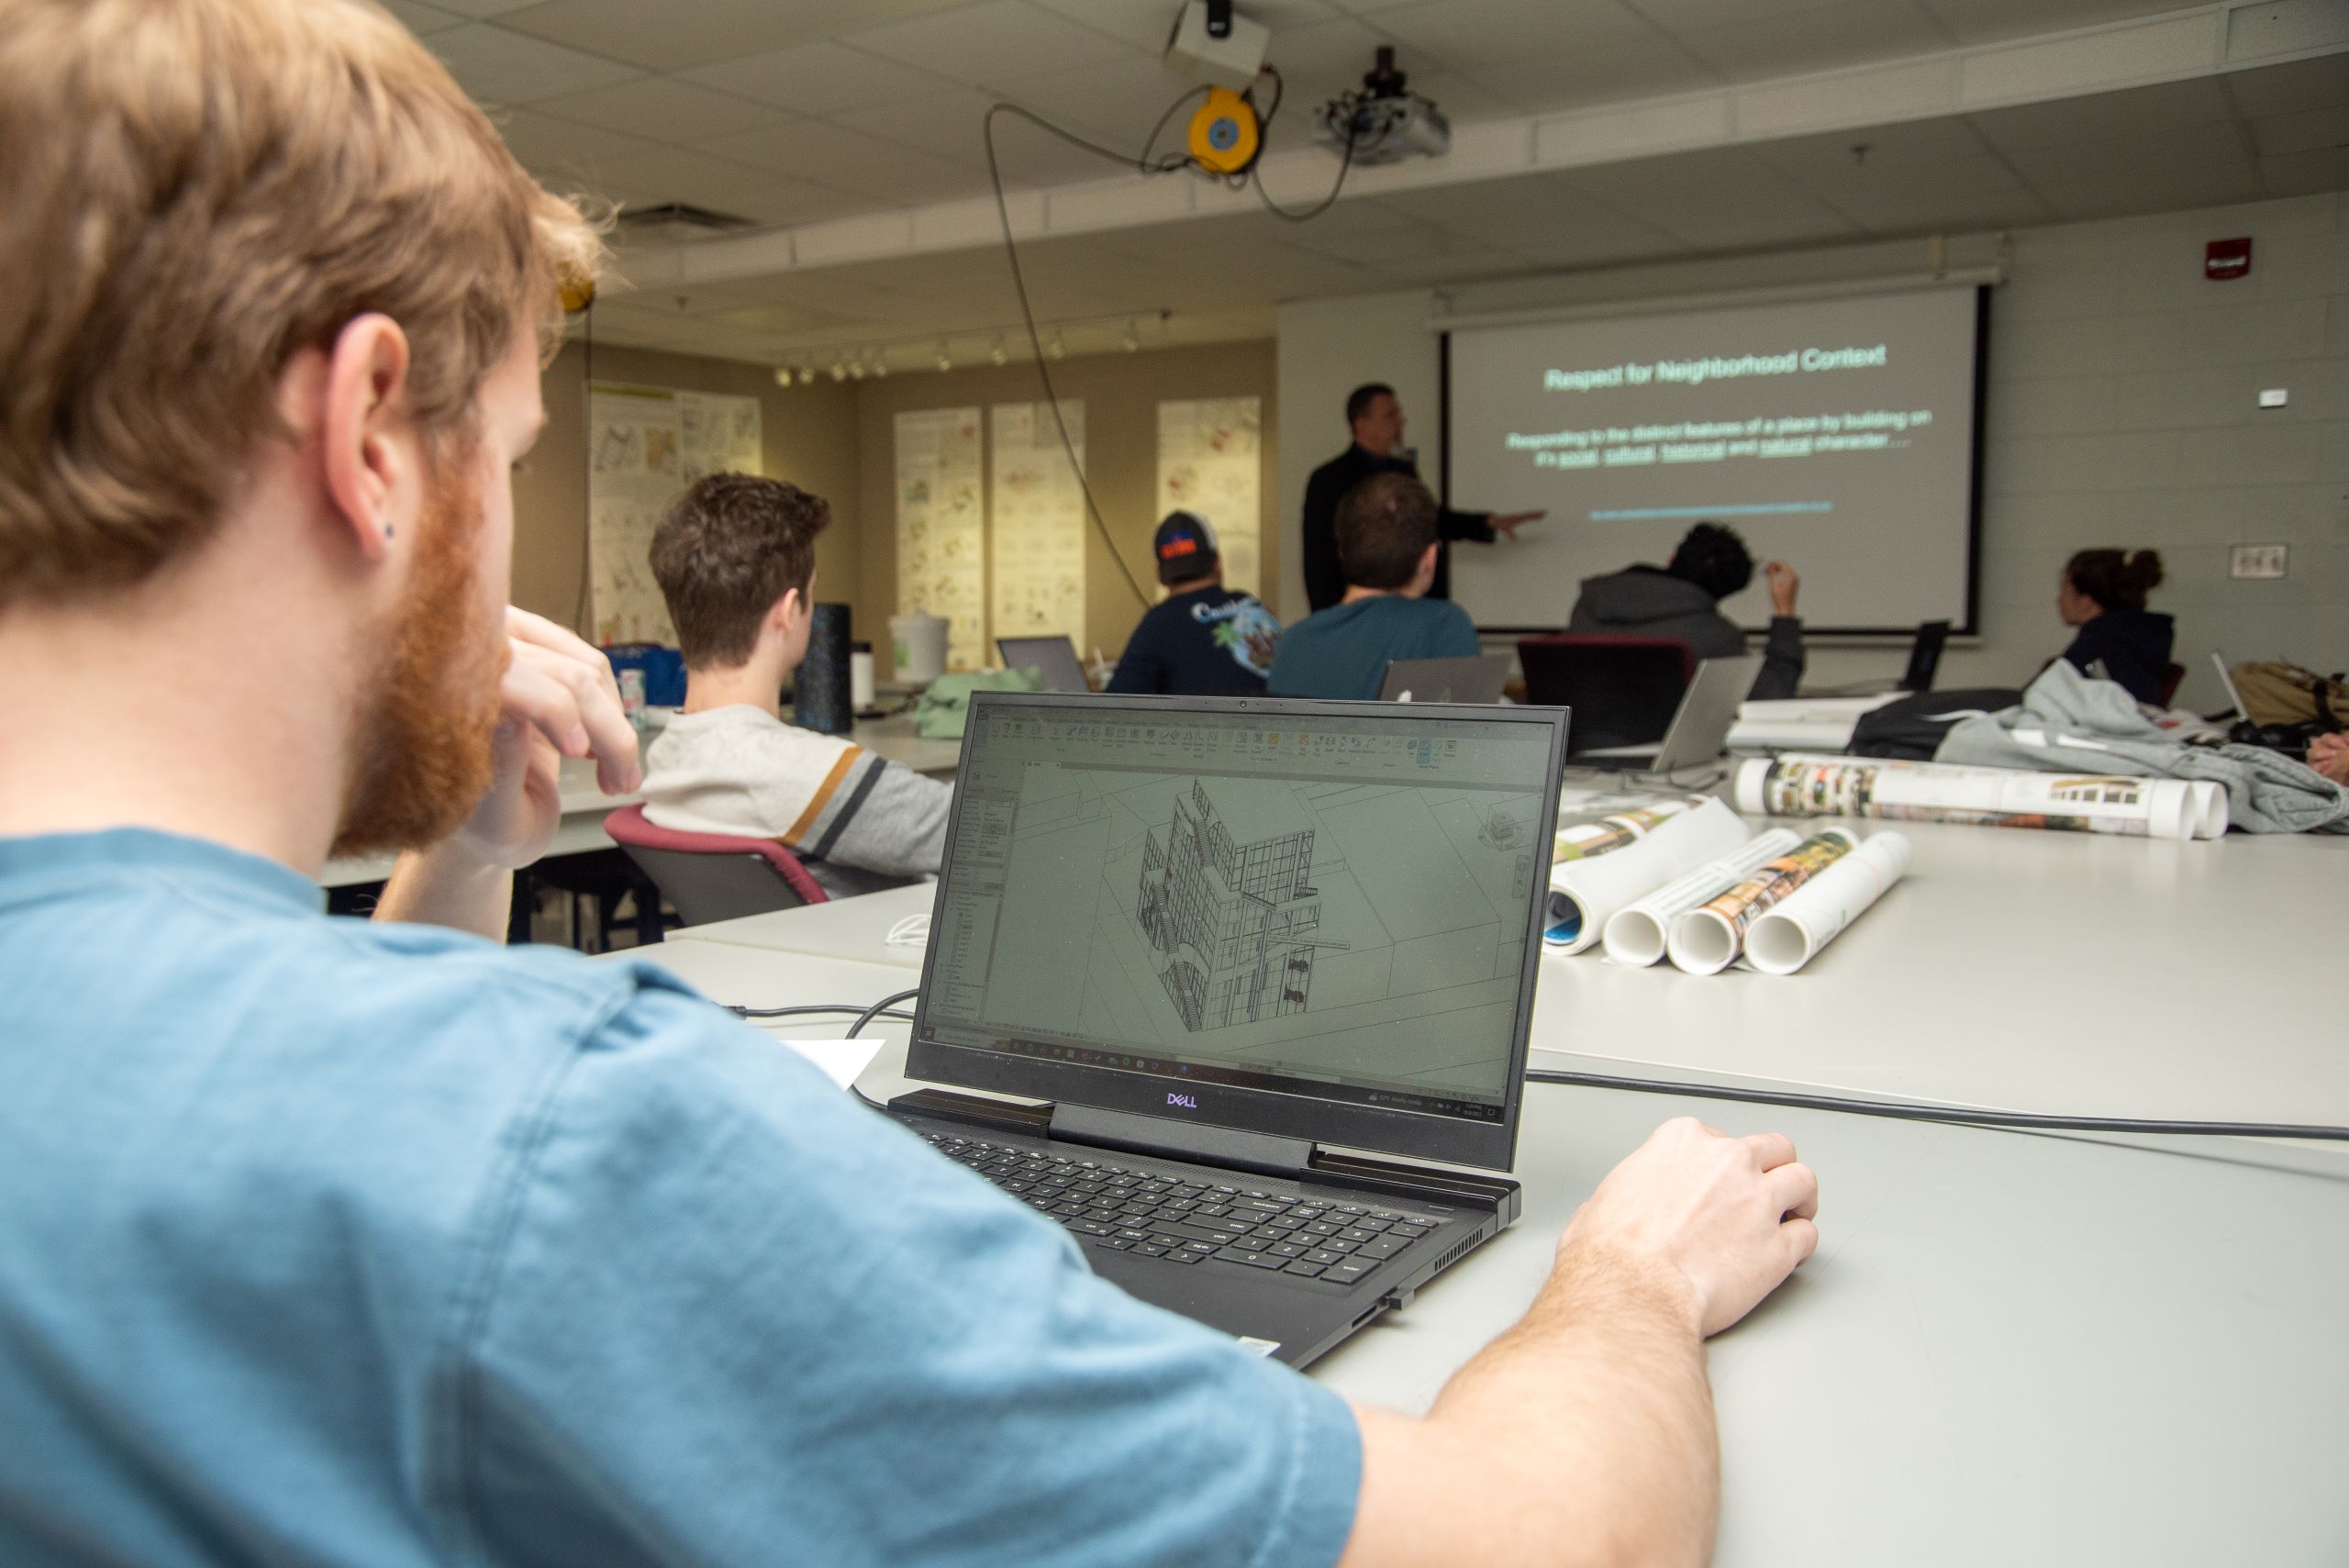 A student uses a laptop displaying a drafting program during a presentation in a classroom at a Western New York Works college.